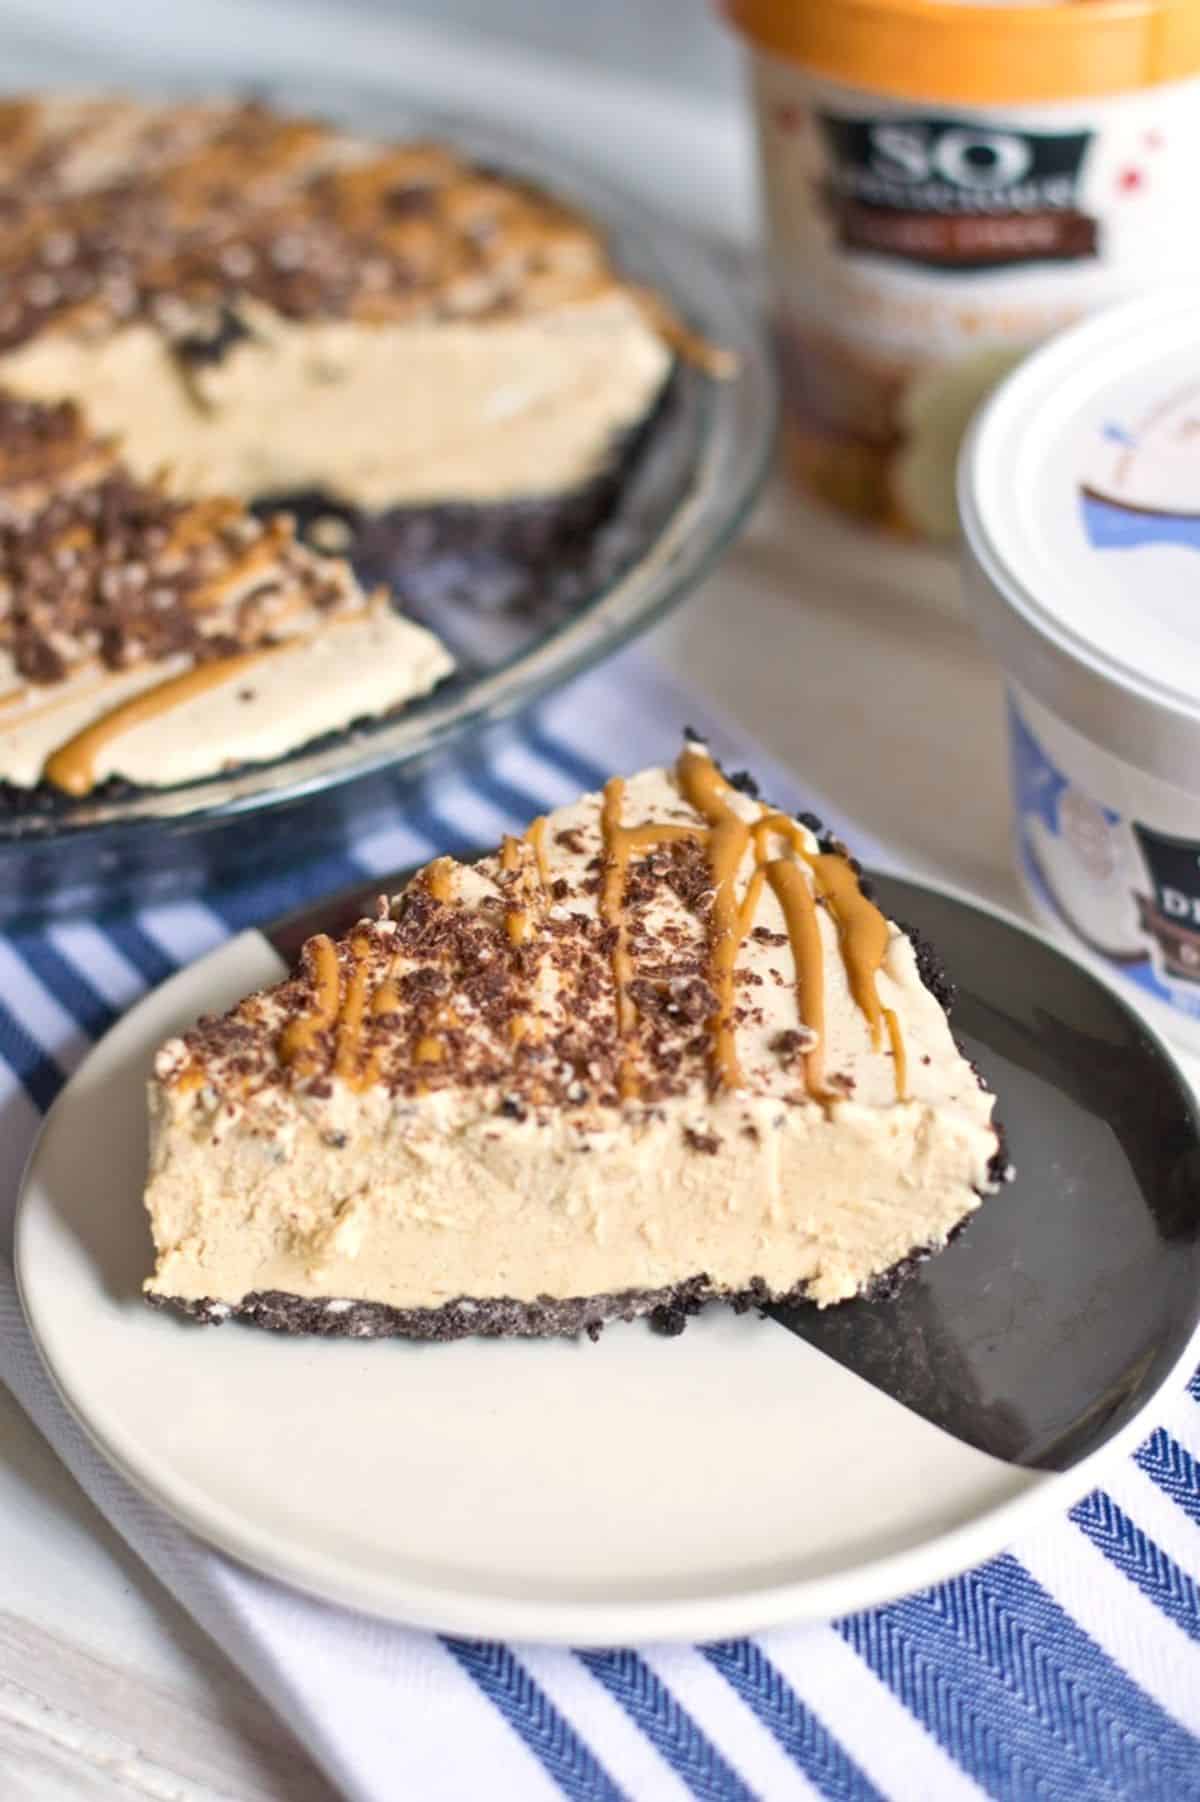 A piece of Dairy-Free Peanut Butter Ice Cream Pie with Chocolate Cookie Crust on a black and white plate.